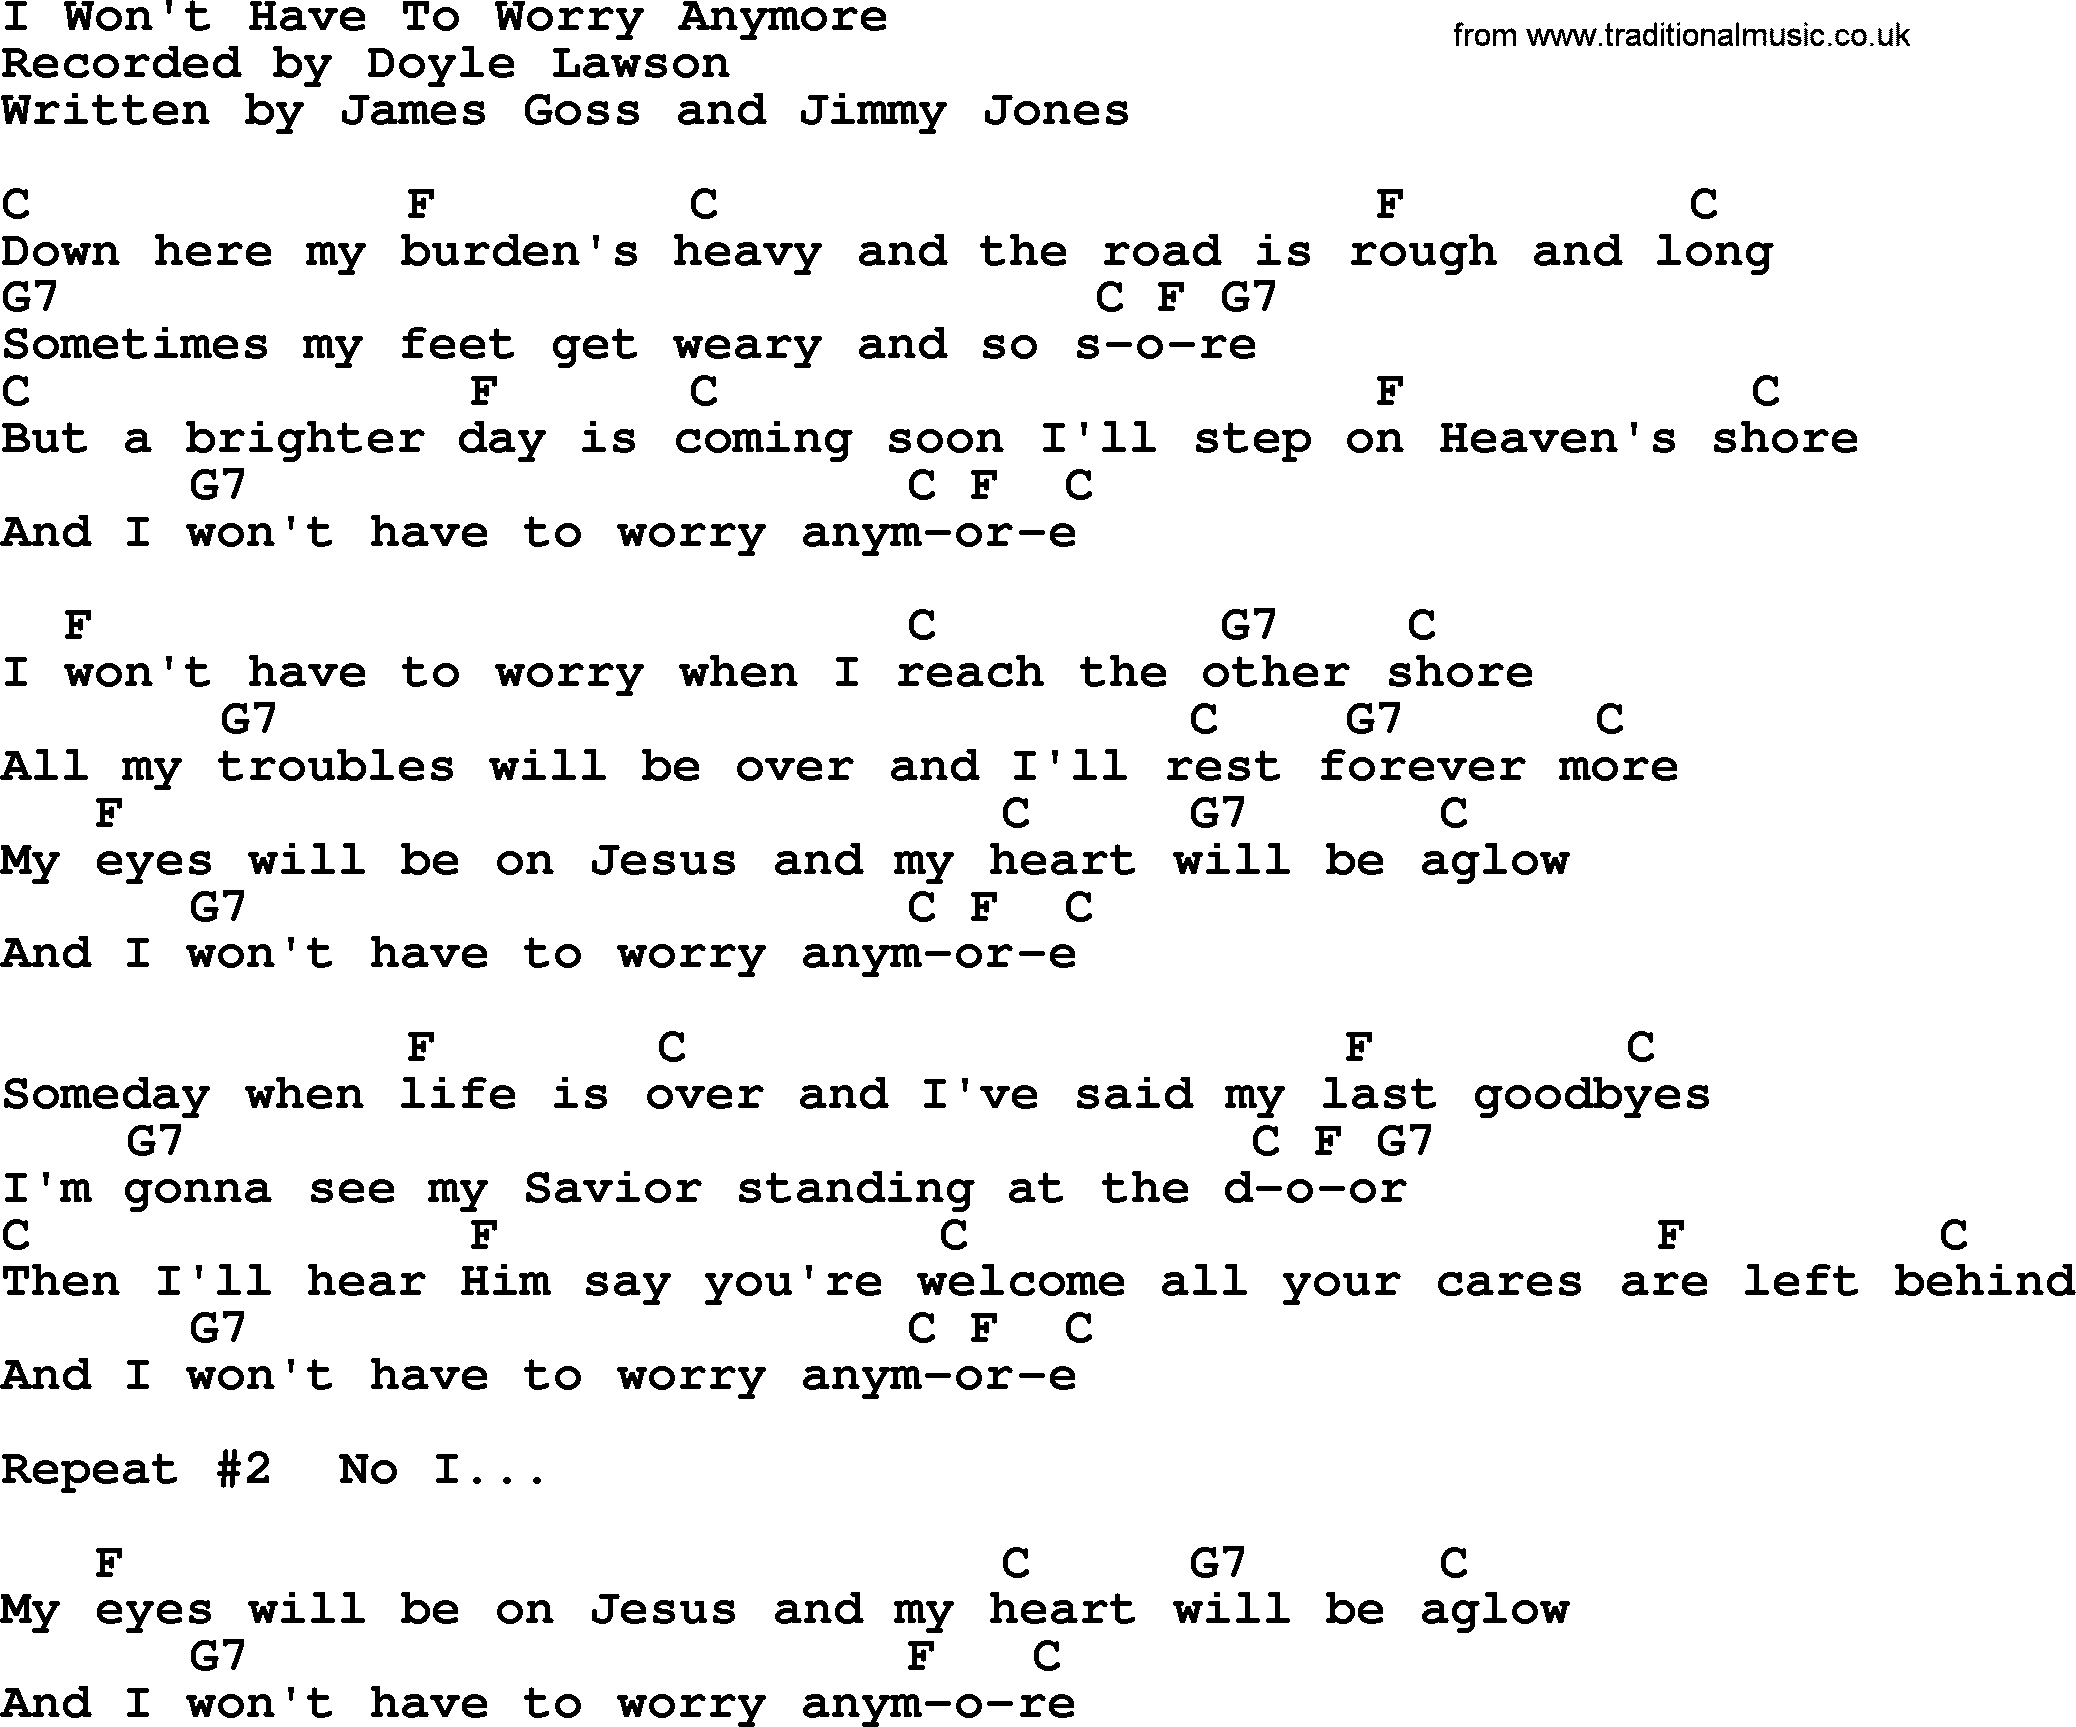 Bluegrass song: I Won't Have To Worry Anymore, lyrics and chords